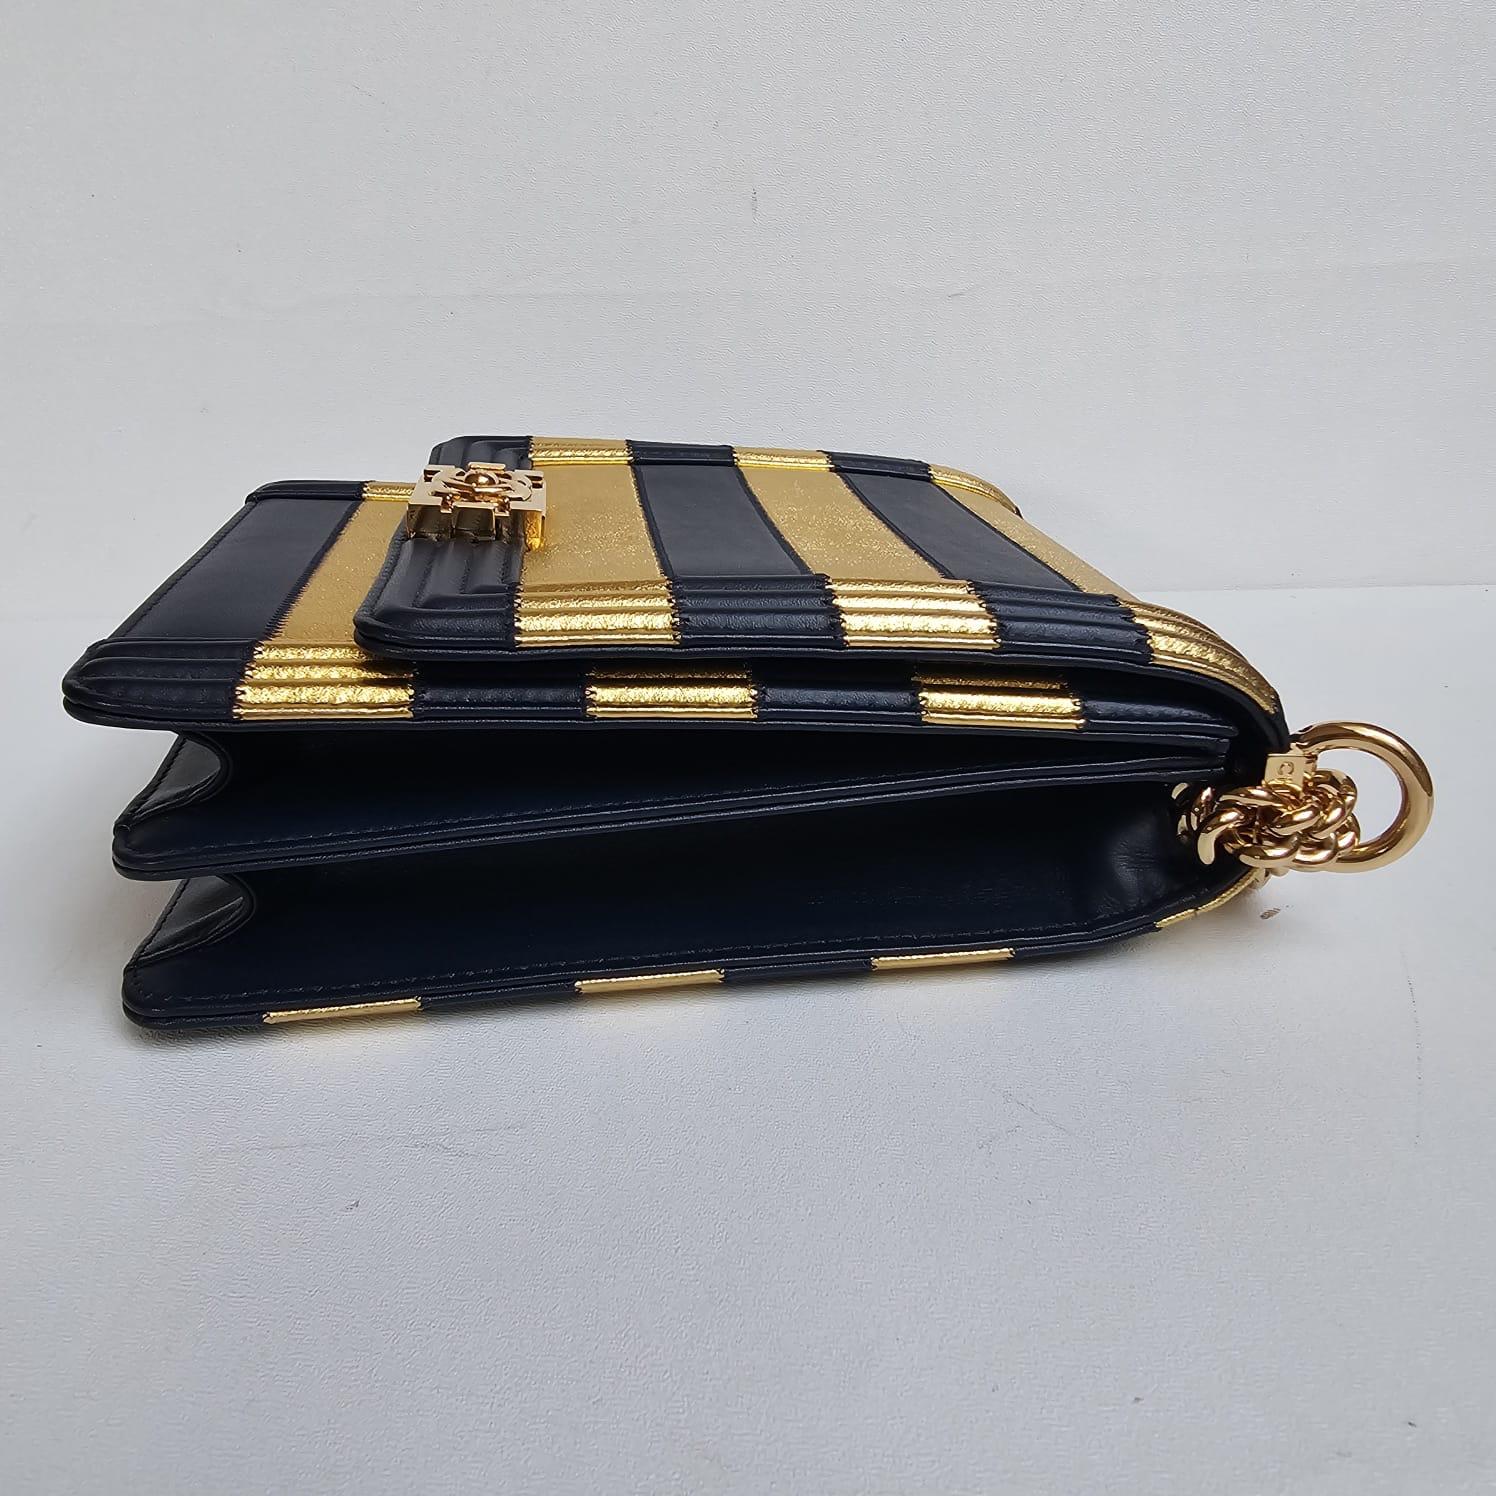 Chanel North South Vertical Gold Navy Metallic Stripe Boy Bag For Sale 8